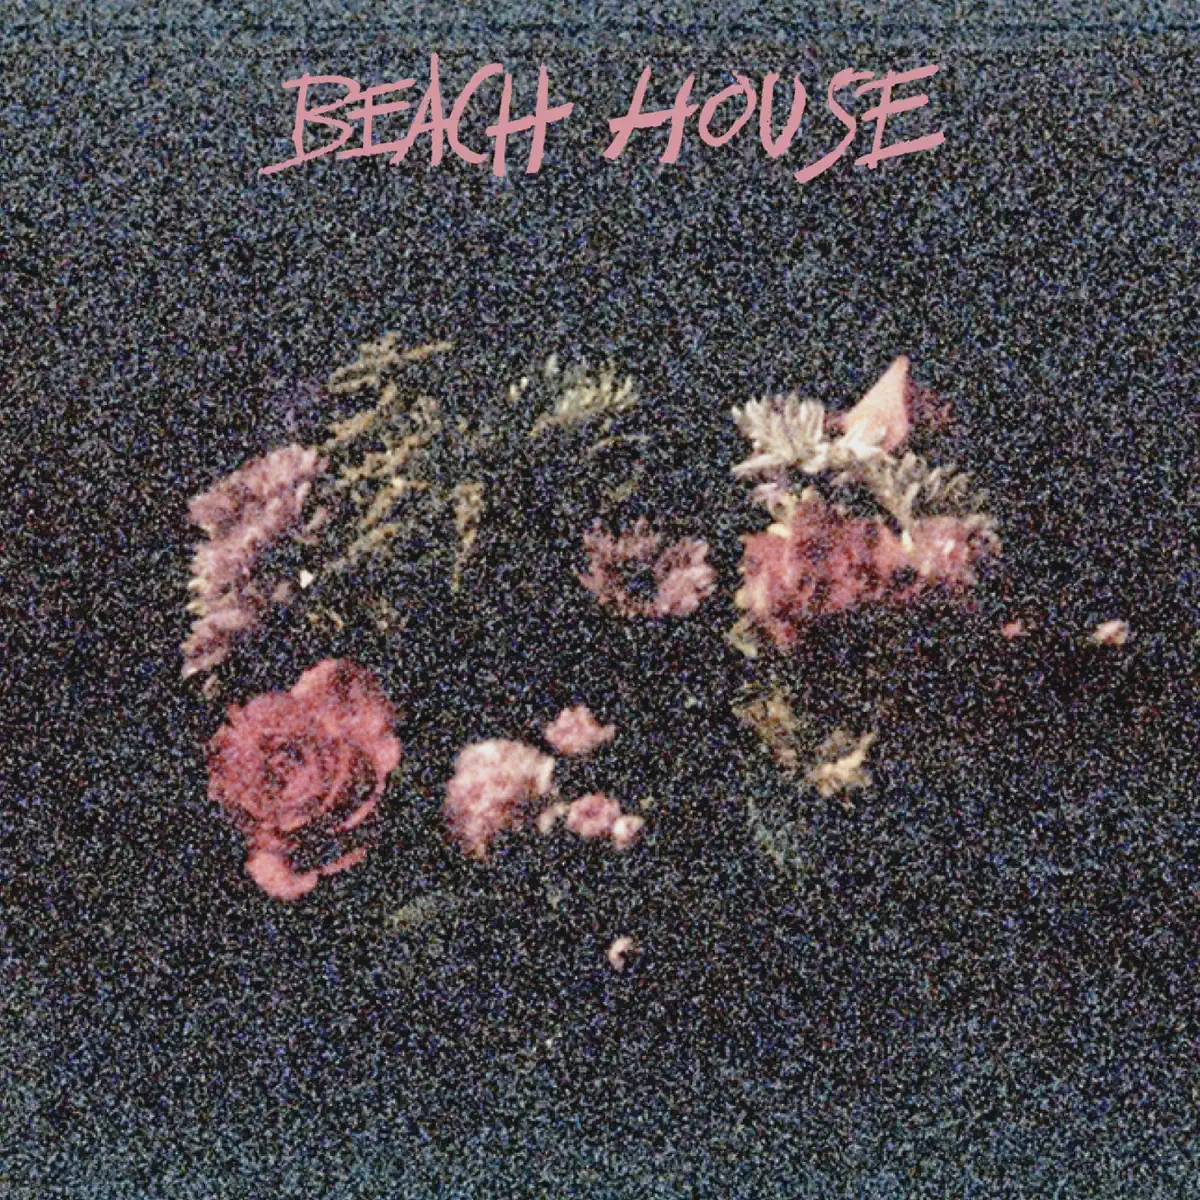 Beach House - iTunes Session - EP (2010) [iTunes Plus AAC M4A]-新房子